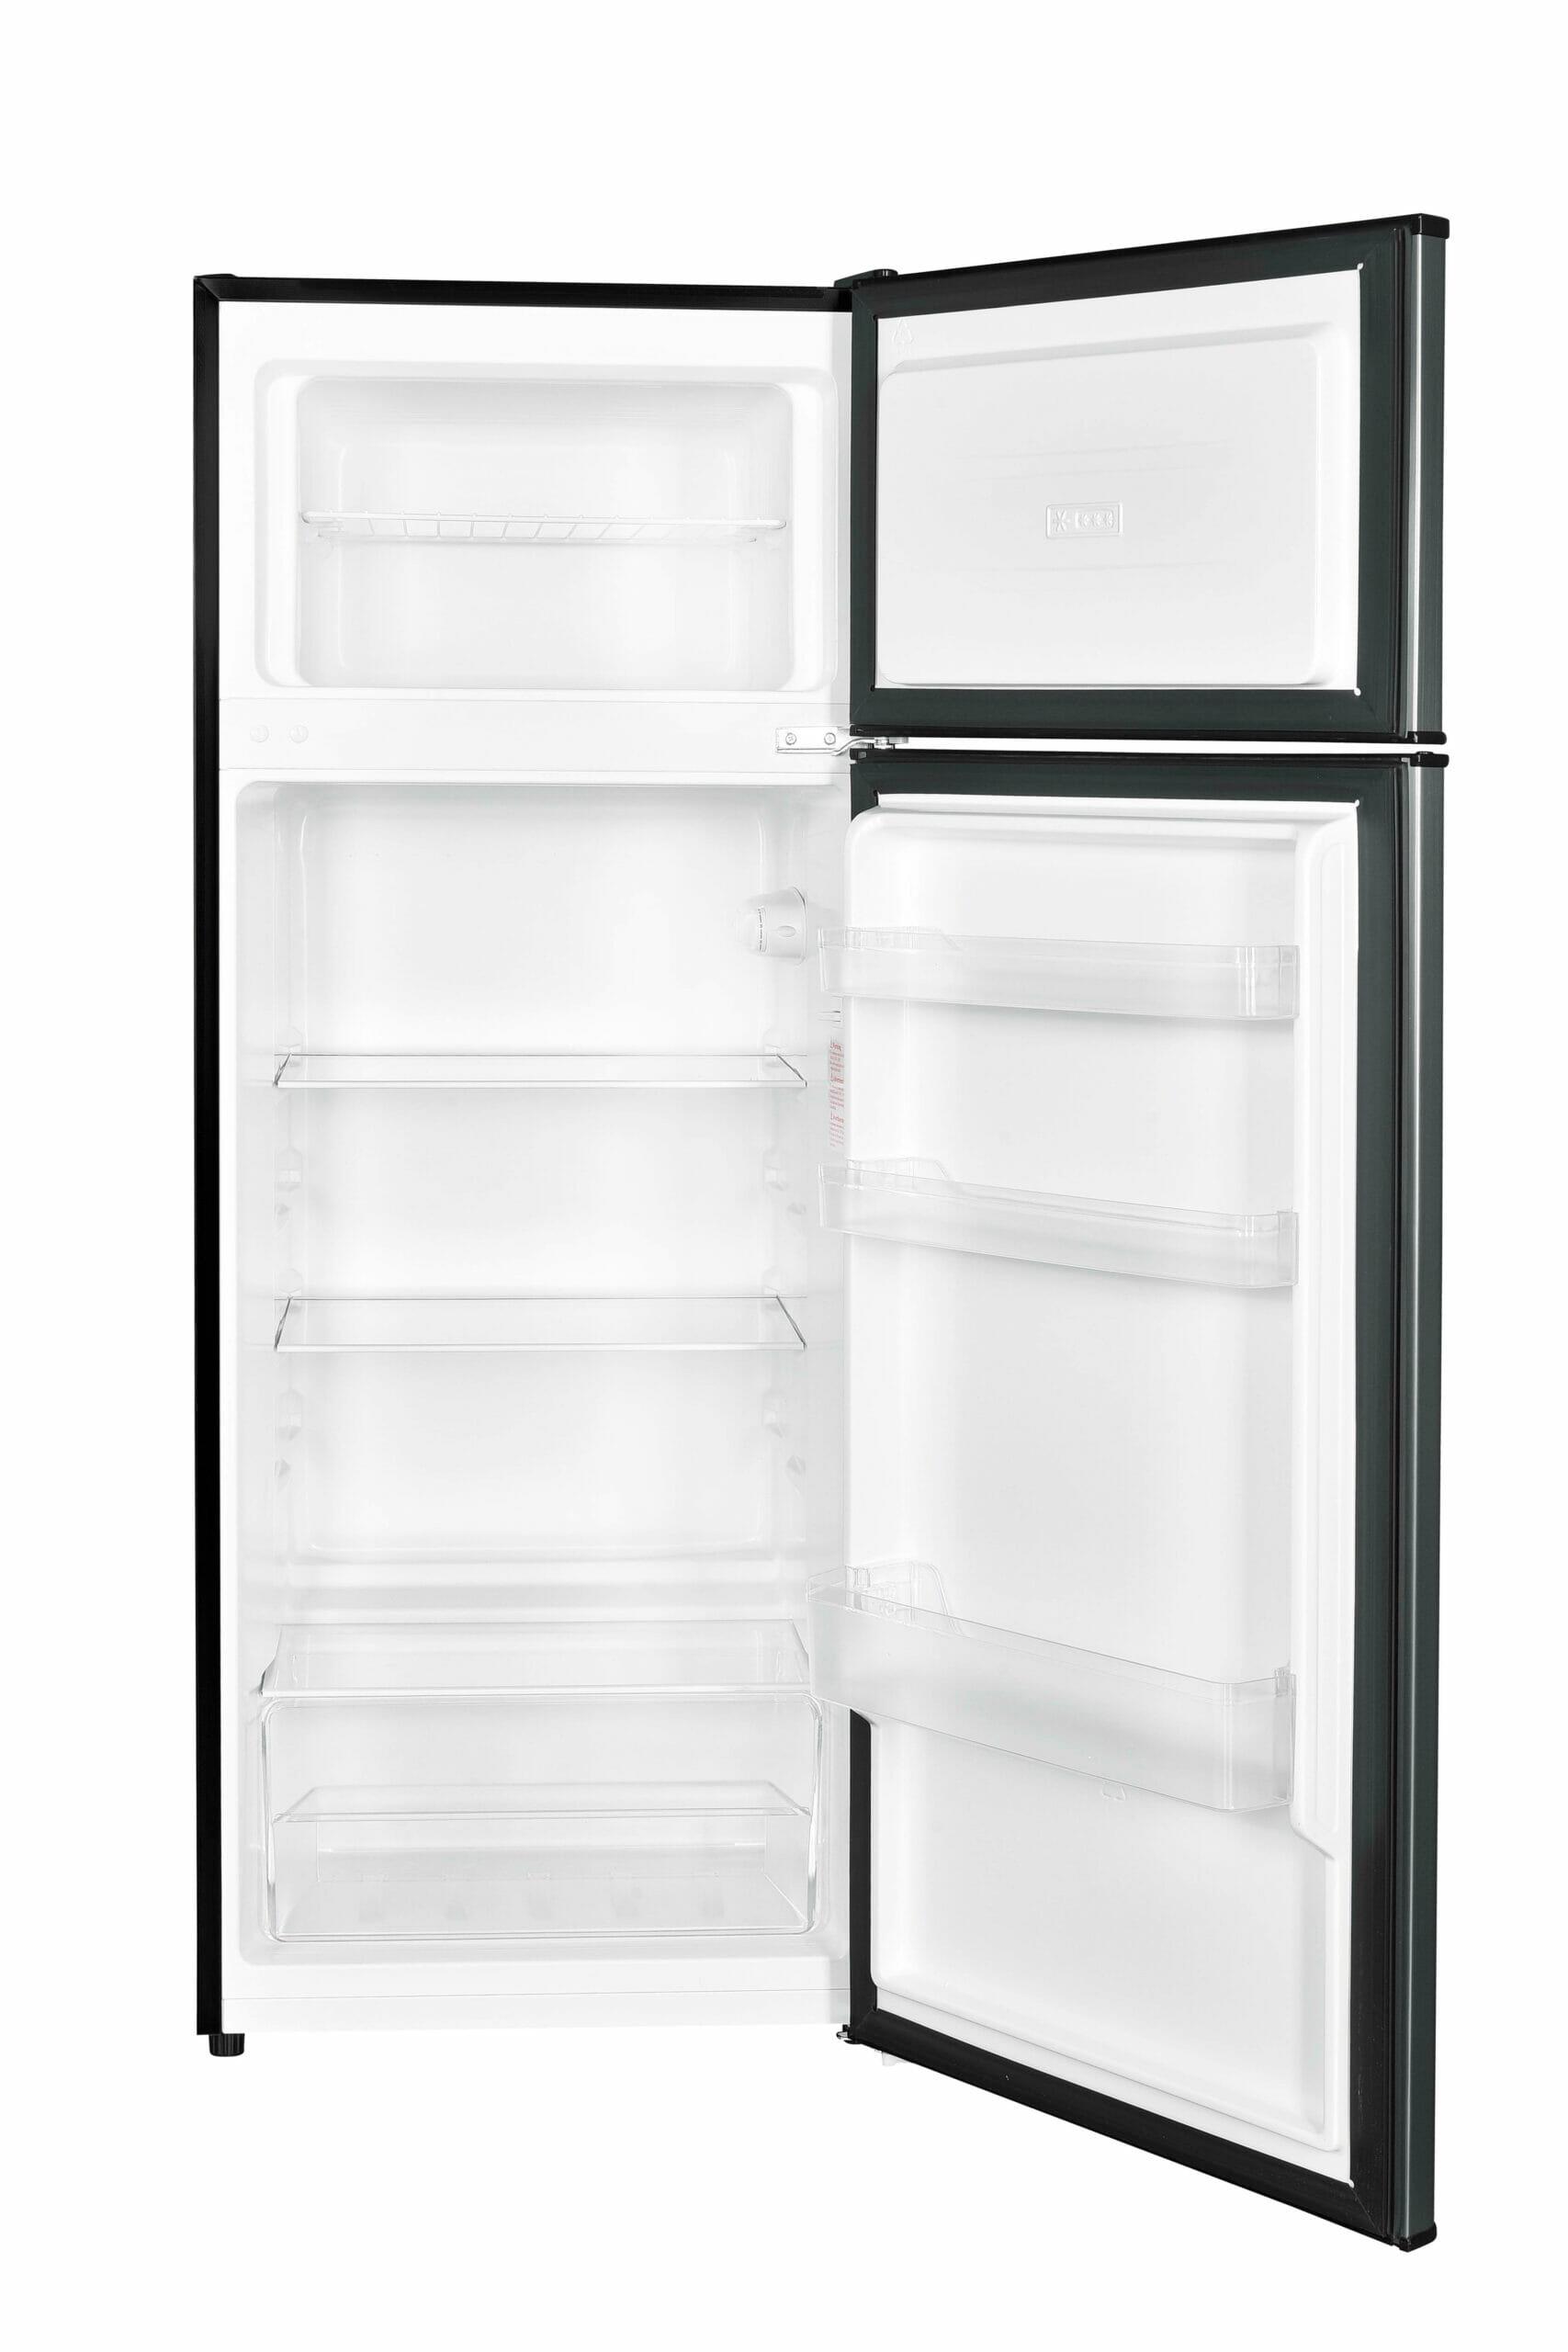 Danby 7.4 cu. ft. Apartment Size Top Mount Fridge in Stainless Steel